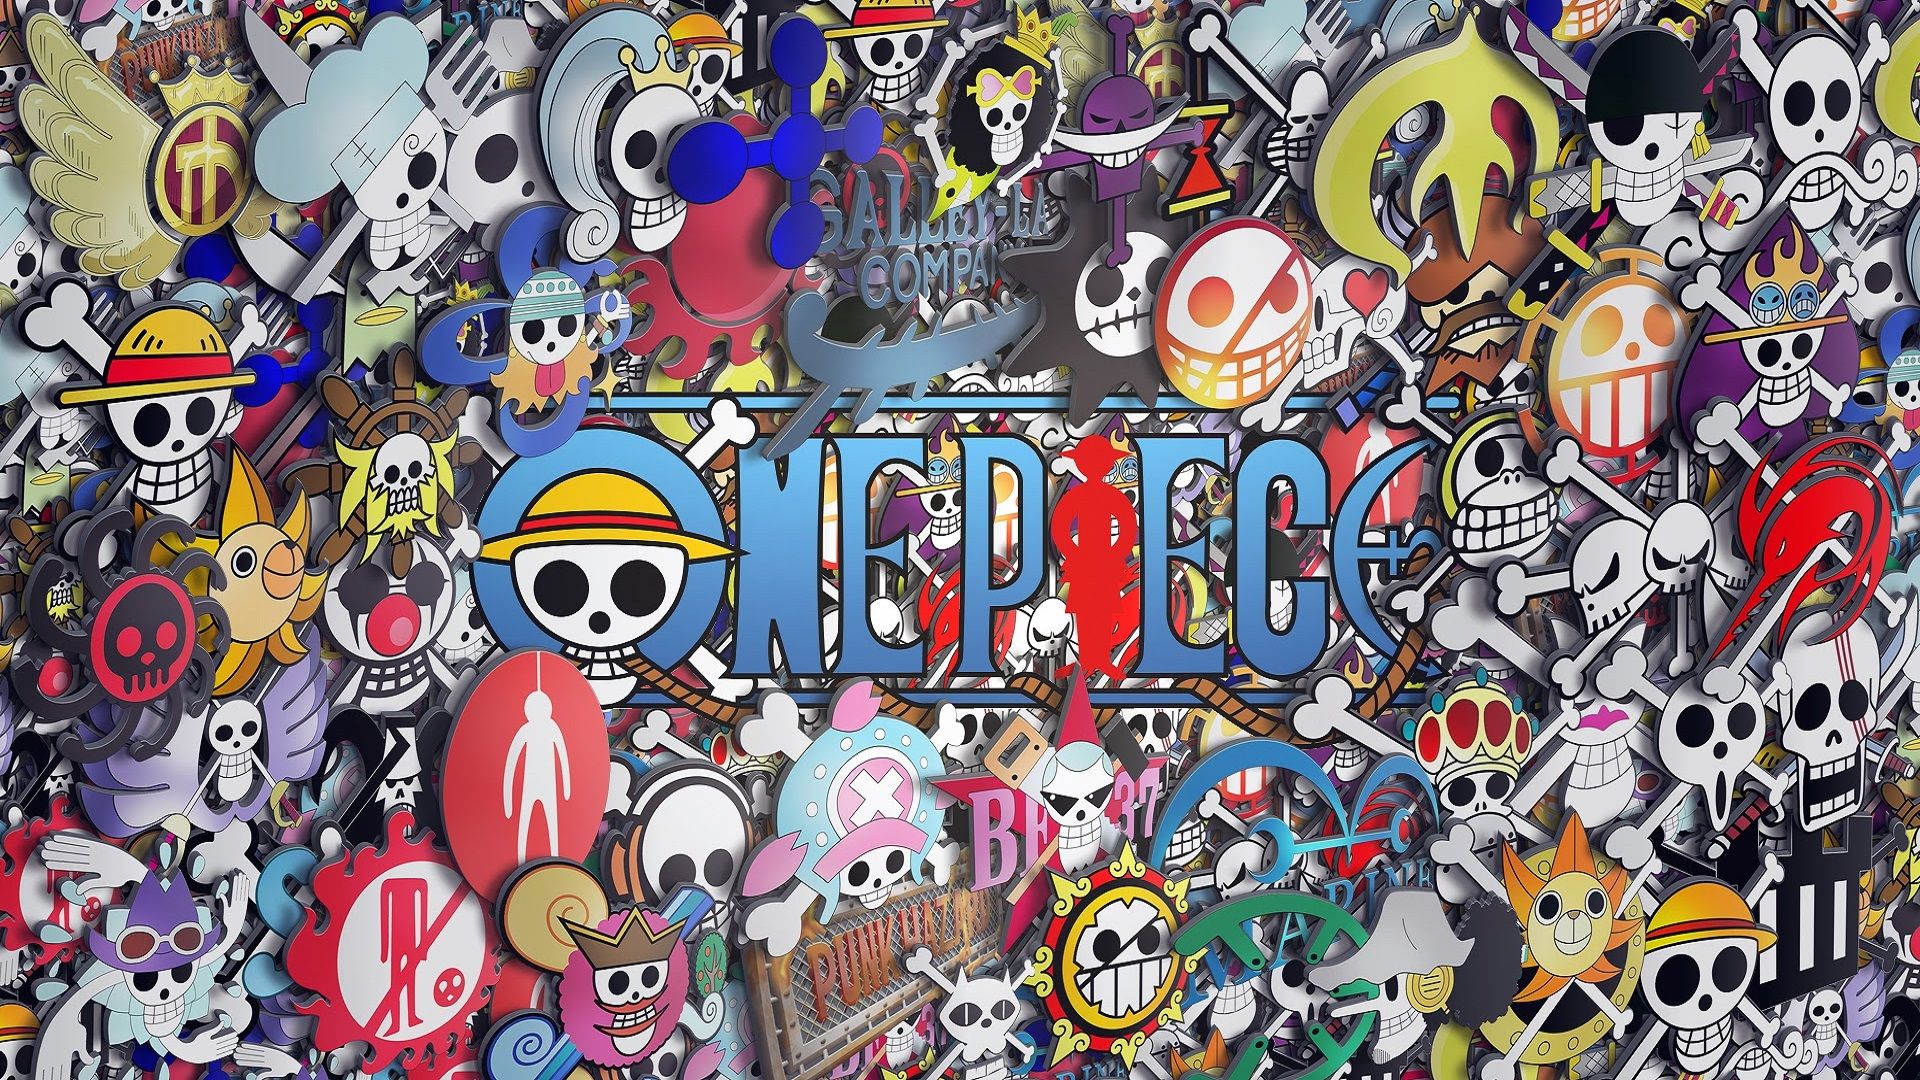 Top 999+ One Piece Wallpaper Full HD, 4K✓Free to Use